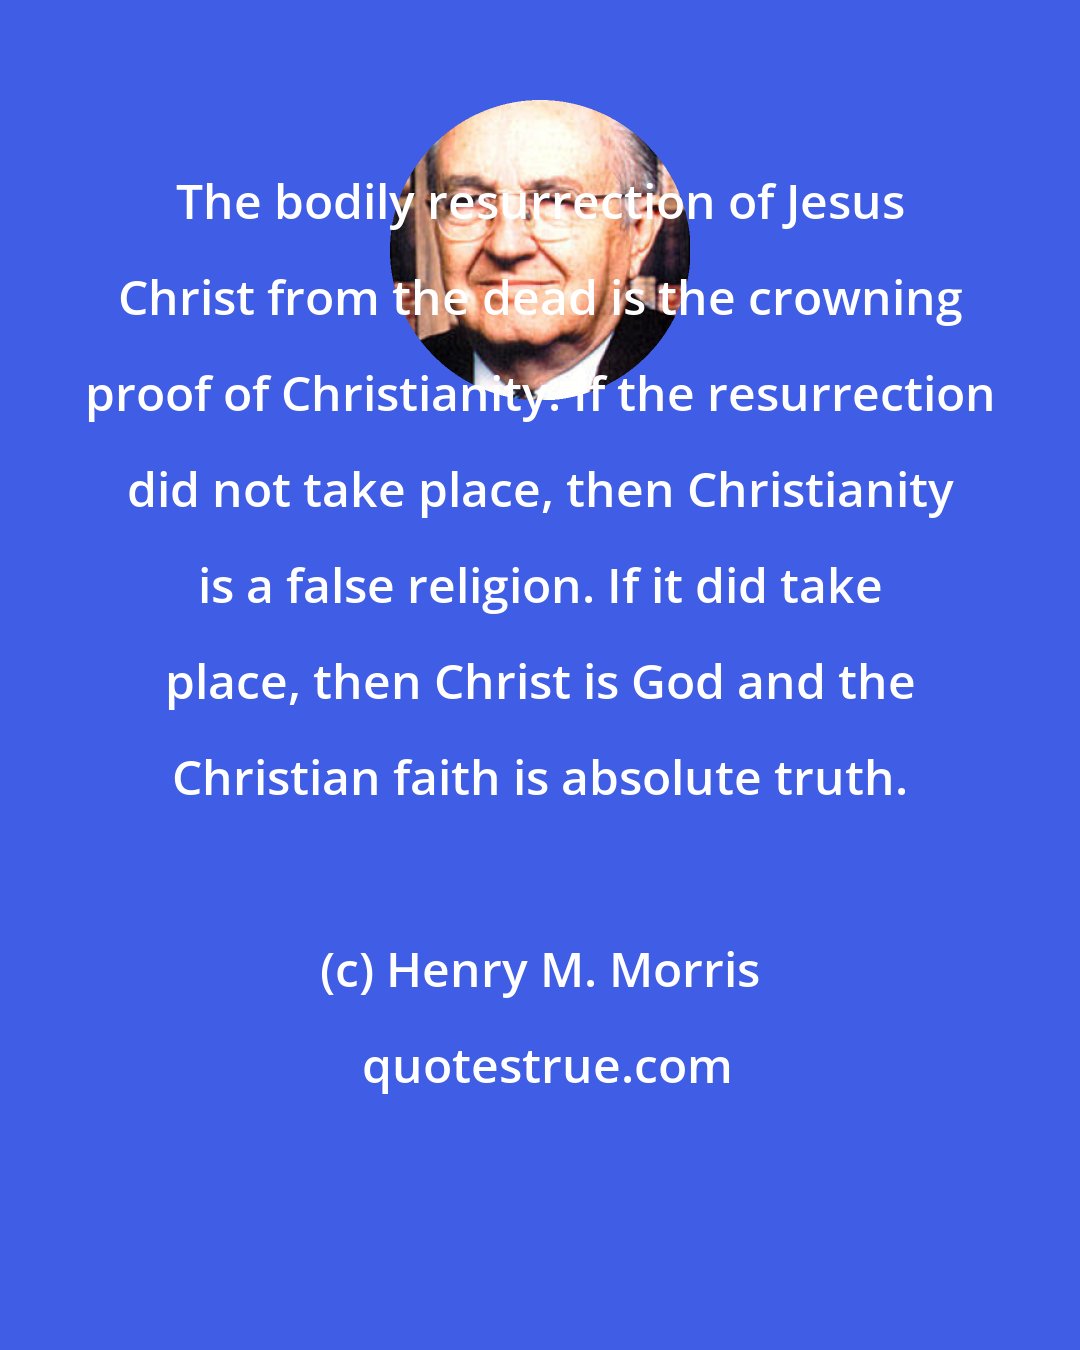 Henry M. Morris: The bodily resurrection of Jesus Christ from the dead is the crowning proof of Christianity. If the resurrection did not take place, then Christianity is a false religion. If it did take place, then Christ is God and the Christian faith is absolute truth.